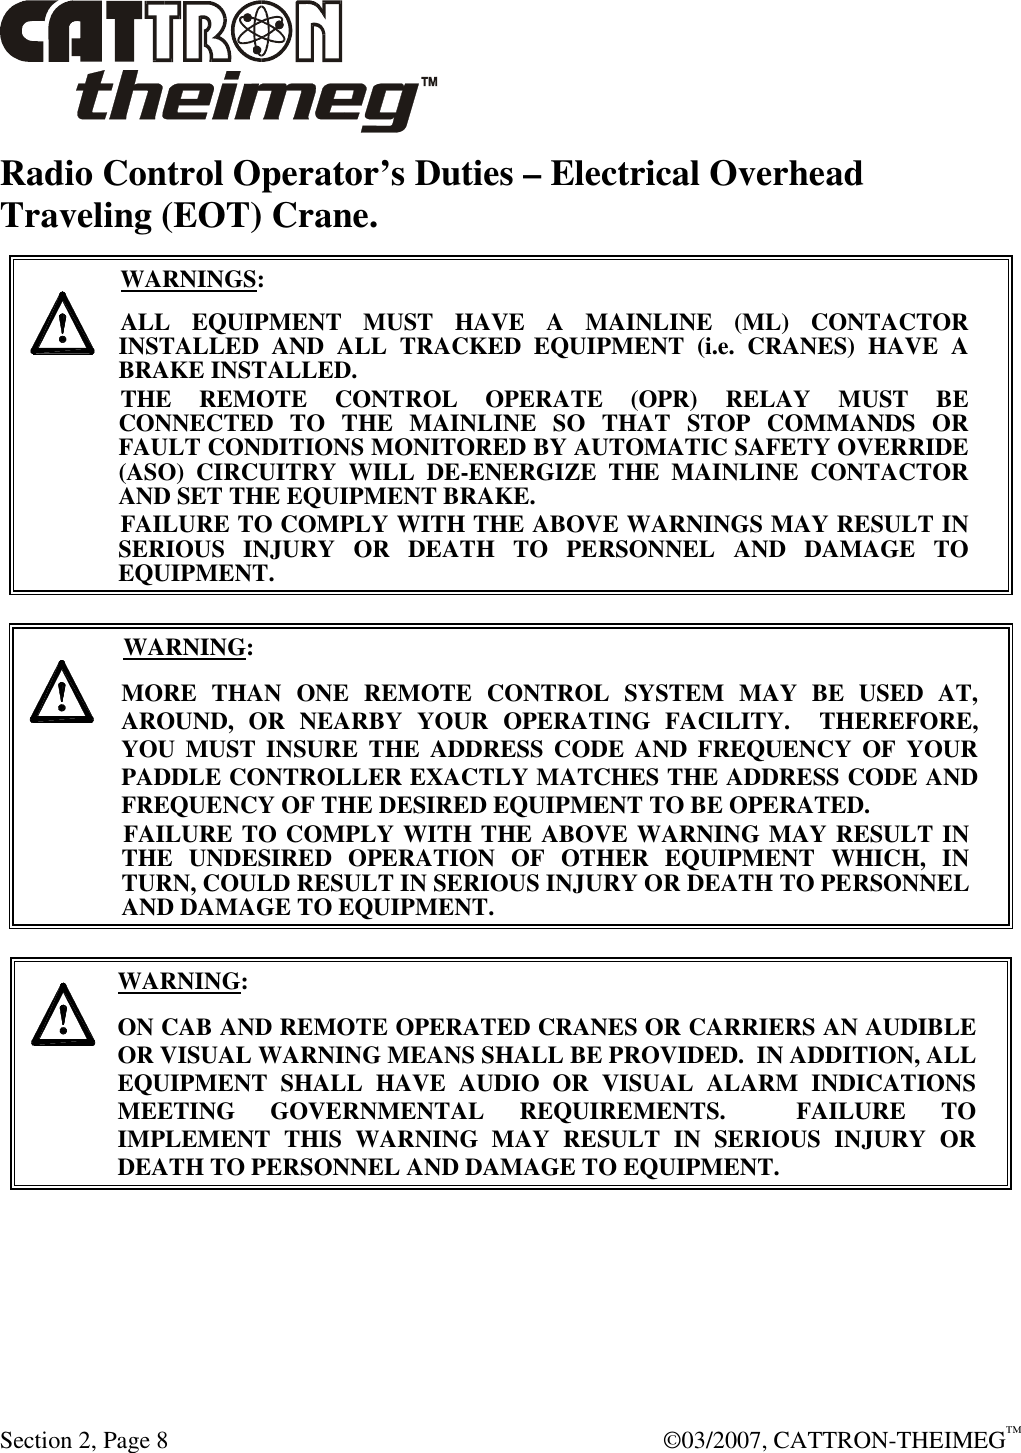  Section 2, Page 8    ©03/2007, CATTRON-THEIMEG™ Radio Control Operator’s Duties – Electrical Overhead Traveling (EOT) Crane.      WARNINGS: ALL  EQUIPMENT  MUST  HAVE  A  MAINLINE  (ML)  CONTACTOR INSTALLED  AND  ALL  TRACKED  EQUIPMENT  (i.e.  CRANES)  HAVE  A BRAKE INSTALLED. THE  REMOTE  CONTROL  OPERATE  (OPR)  RELAY  MUST  BE CONNECTED  TO  THE  MAINLINE  SO  THAT  STOP  COMMANDS  OR FAULT CONDITIONS MONITORED BY AUTOMATIC SAFETY OVERRIDE (ASO)  CIRCUITRY  WILL  DE-ENERGIZE  THE  MAINLINE  CONTACTOR AND SET THE EQUIPMENT BRAKE.  FAILURE TO COMPLY WITH THE ABOVE WARNINGS MAY RESULT IN SERIOUS  INJURY  OR  DEATH  TO  PERSONNEL  AND  DAMAGE  TO EQUIPMENT.       WARNING: MORE  THAN  ONE  REMOTE  CONTROL  SYSTEM  MAY  BE  USED  AT, AROUND,  OR  NEARBY  YOUR  OPERATING  FACILITY.    THEREFORE, YOU  MUST  INSURE  THE  ADDRESS CODE  AND FREQUENCY  OF  YOUR PADDLE CONTROLLER EXACTLY MATCHES THE ADDRESS CODE AND FREQUENCY OF THE DESIRED EQUIPMENT TO BE OPERATED. FAILURE TO COMPLY WITH THE ABOVE WARNING MAY RESULT IN THE  UNDESIRED  OPERATION  OF  OTHER  EQUIPMENT  WHICH,  IN TURN, COULD RESULT IN SERIOUS INJURY OR DEATH TO PERSONNEL AND DAMAGE TO EQUIPMENT.       WARNING: ON CAB AND REMOTE OPERATED CRANES OR CARRIERS AN AUDIBLE OR VISUAL WARNING MEANS SHALL BE PROVIDED.  IN ADDITION, ALL EQUIPMENT  SHALL  HAVE  AUDIO  OR  VISUAL  ALARM  INDICATIONS MEETING  GOVERNMENTAL  REQUIREMENTS.    FAILURE  TO IMPLEMENT  THIS  WARNING  MAY  RESULT  IN  SERIOUS  INJURY  OR DEATH TO PERSONNEL AND DAMAGE TO EQUIPMENT.  